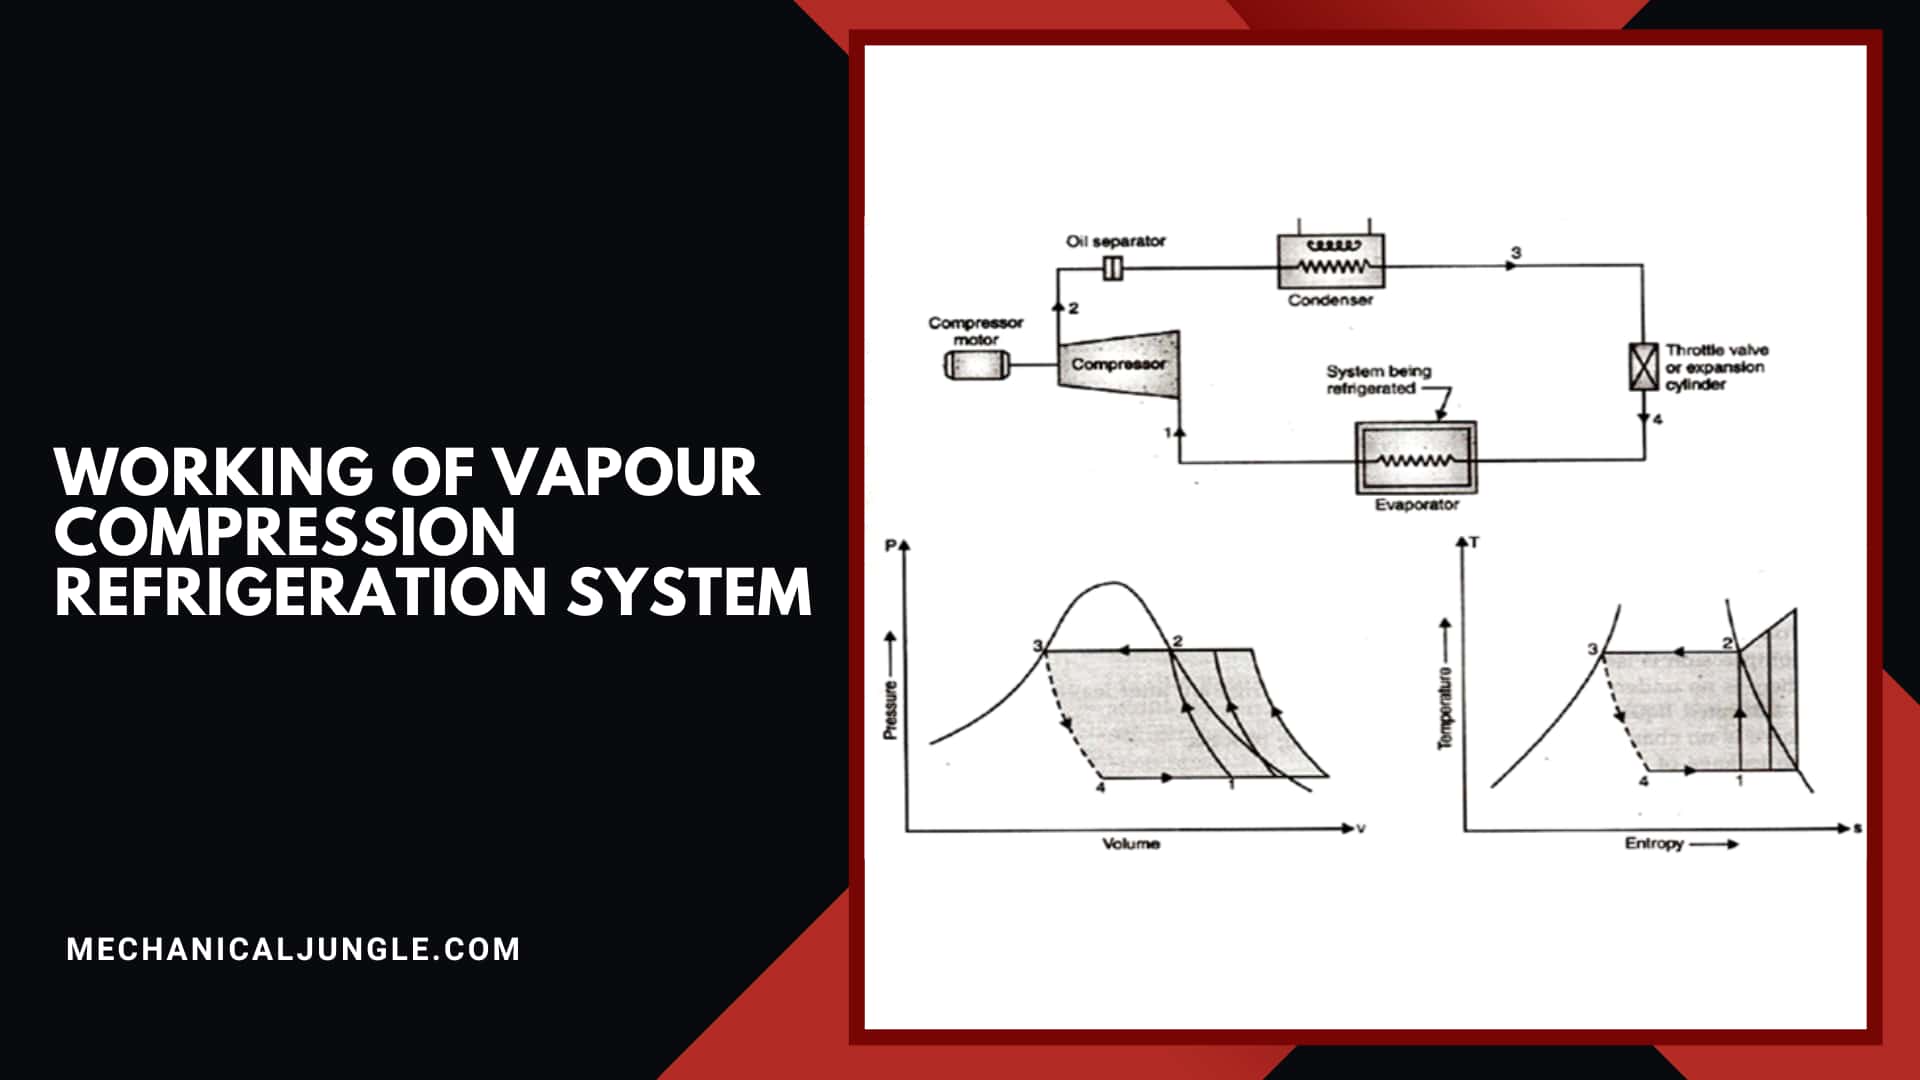 Working of Vapour Compression Refrigeration System